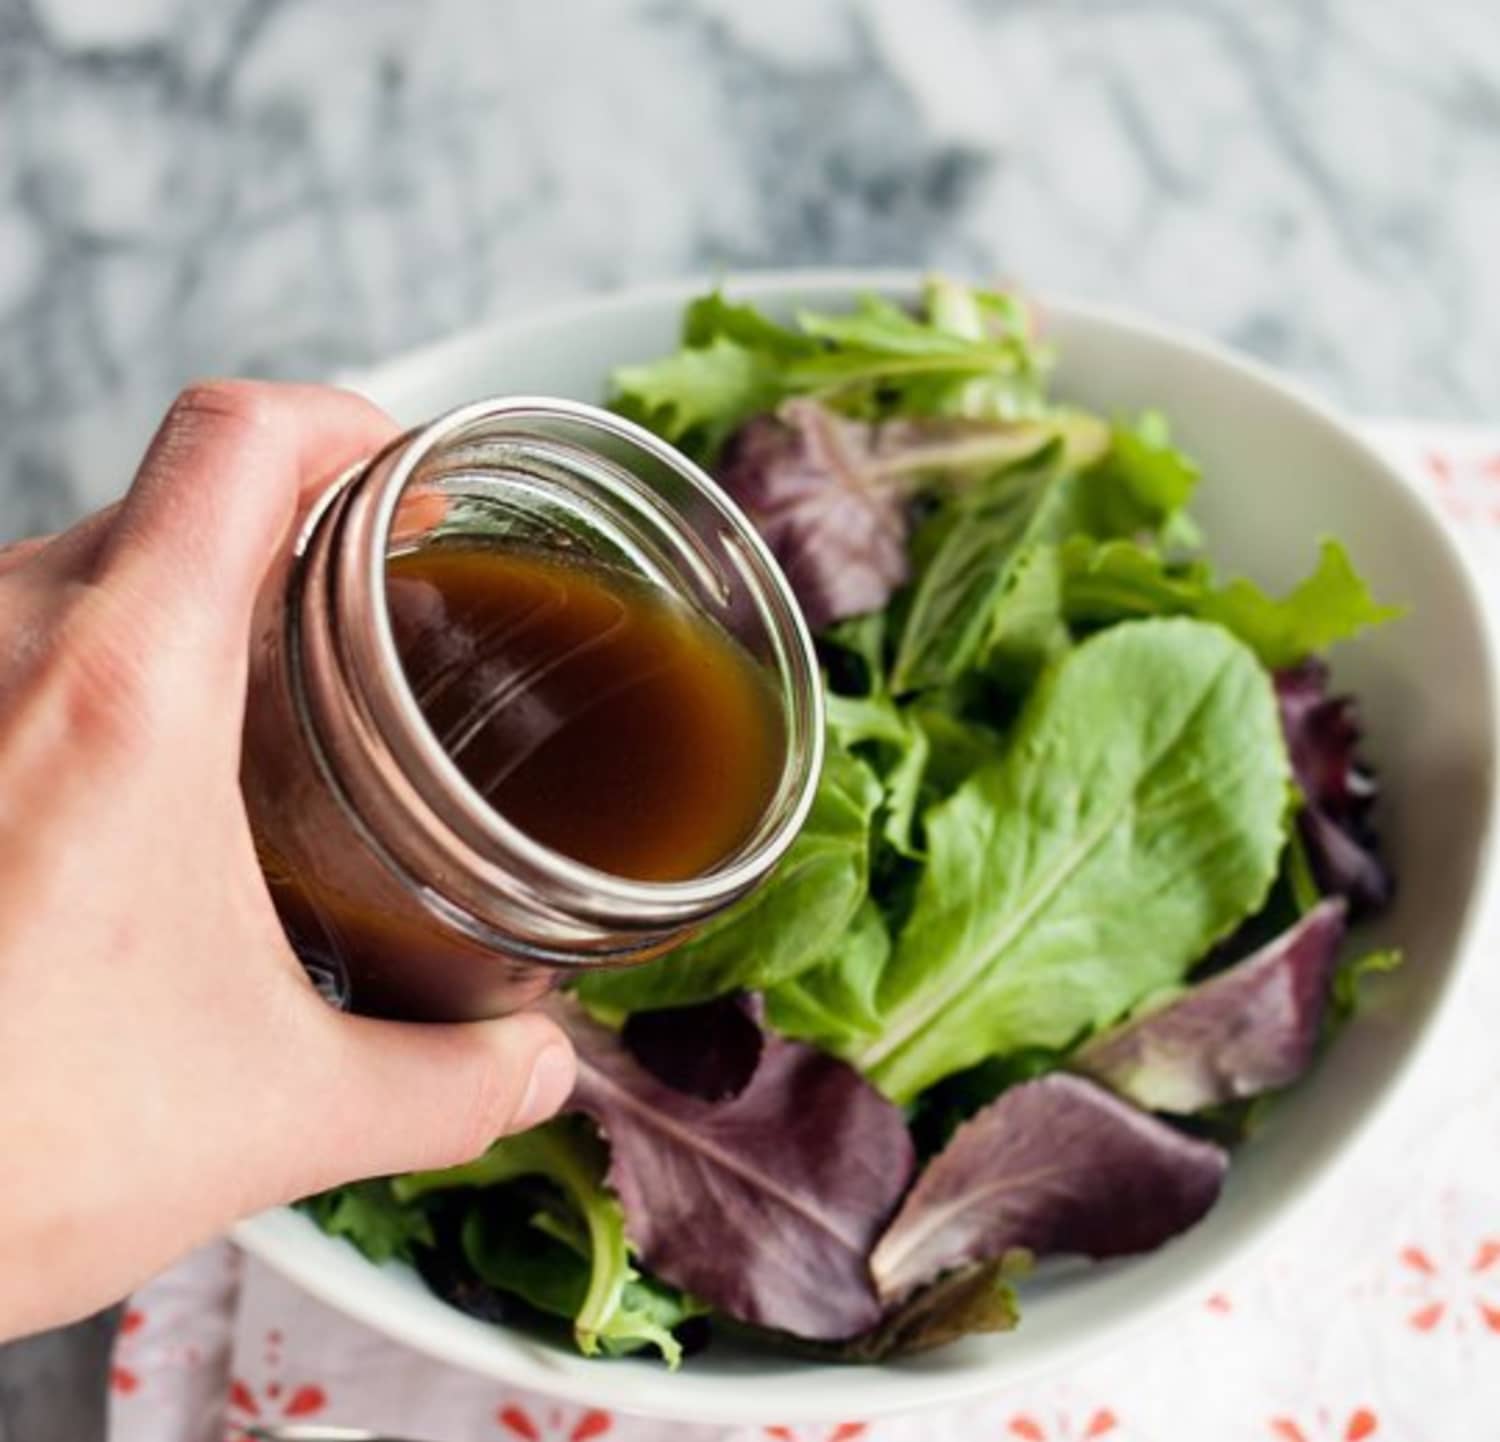 Ideas for Salad Dressings Without Added Sugar?